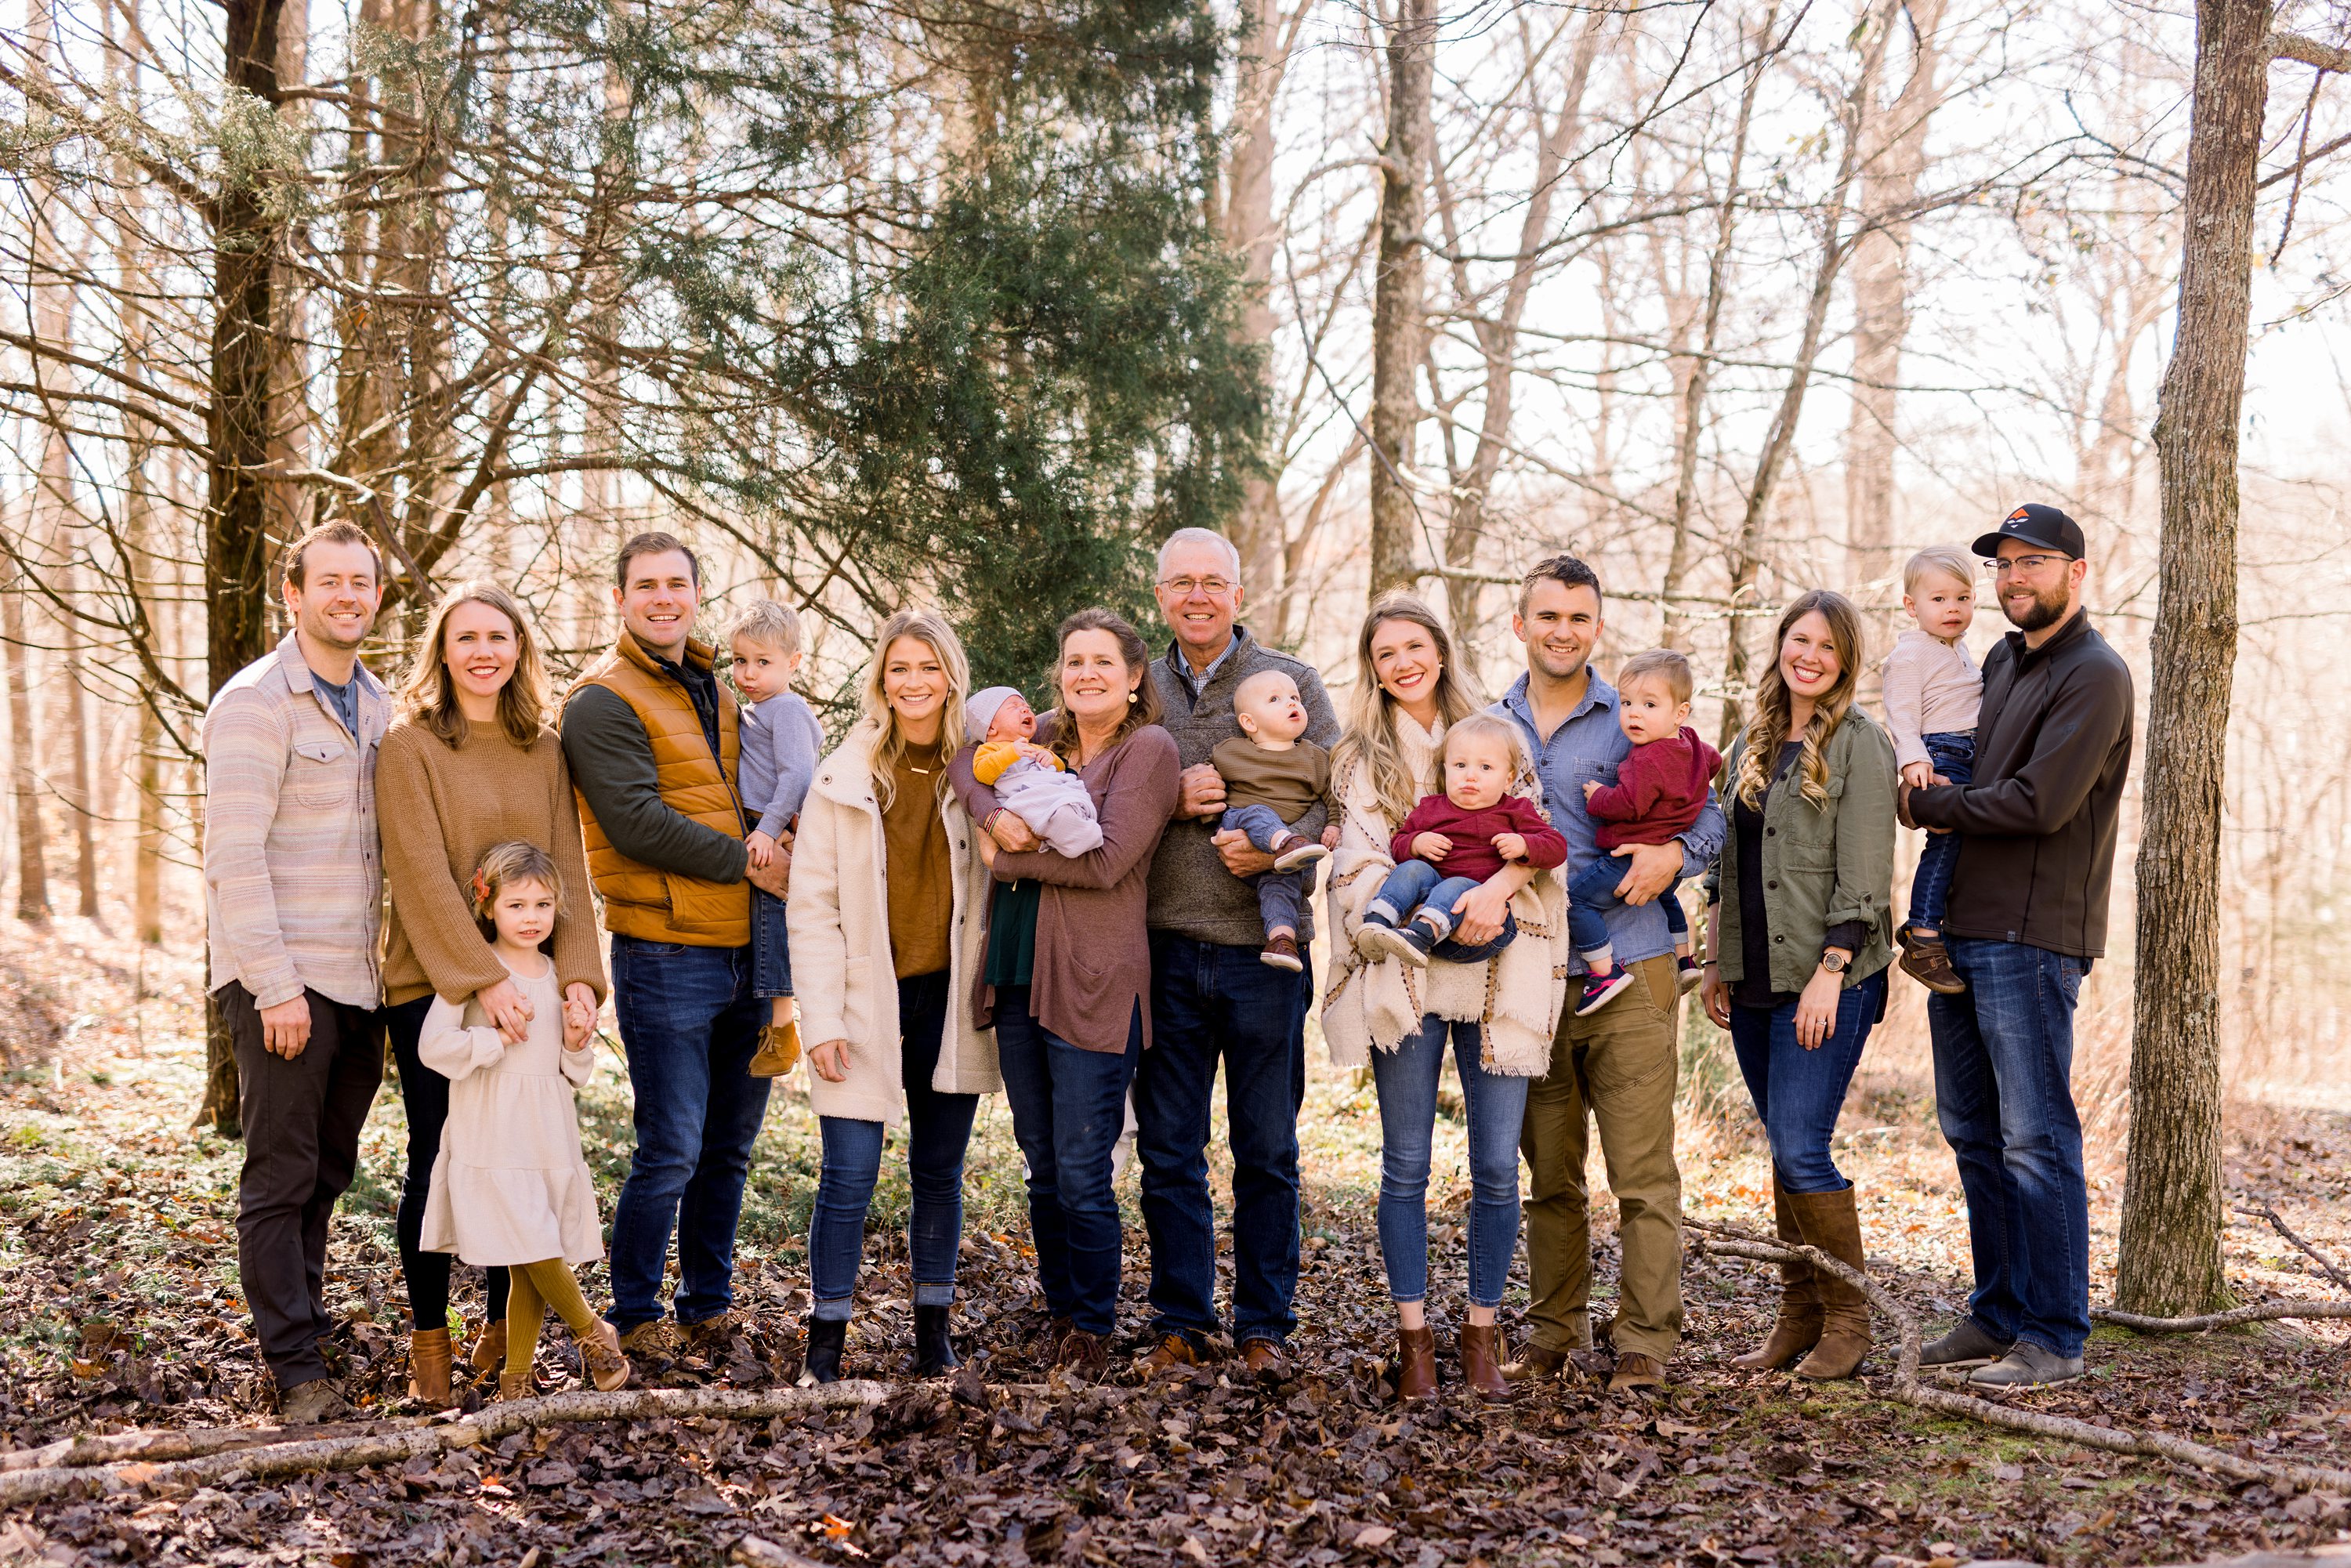 Extended Family Portraits // by Mandy Ringe Photography - MANDY RINGE  PHOTOGRAPHY